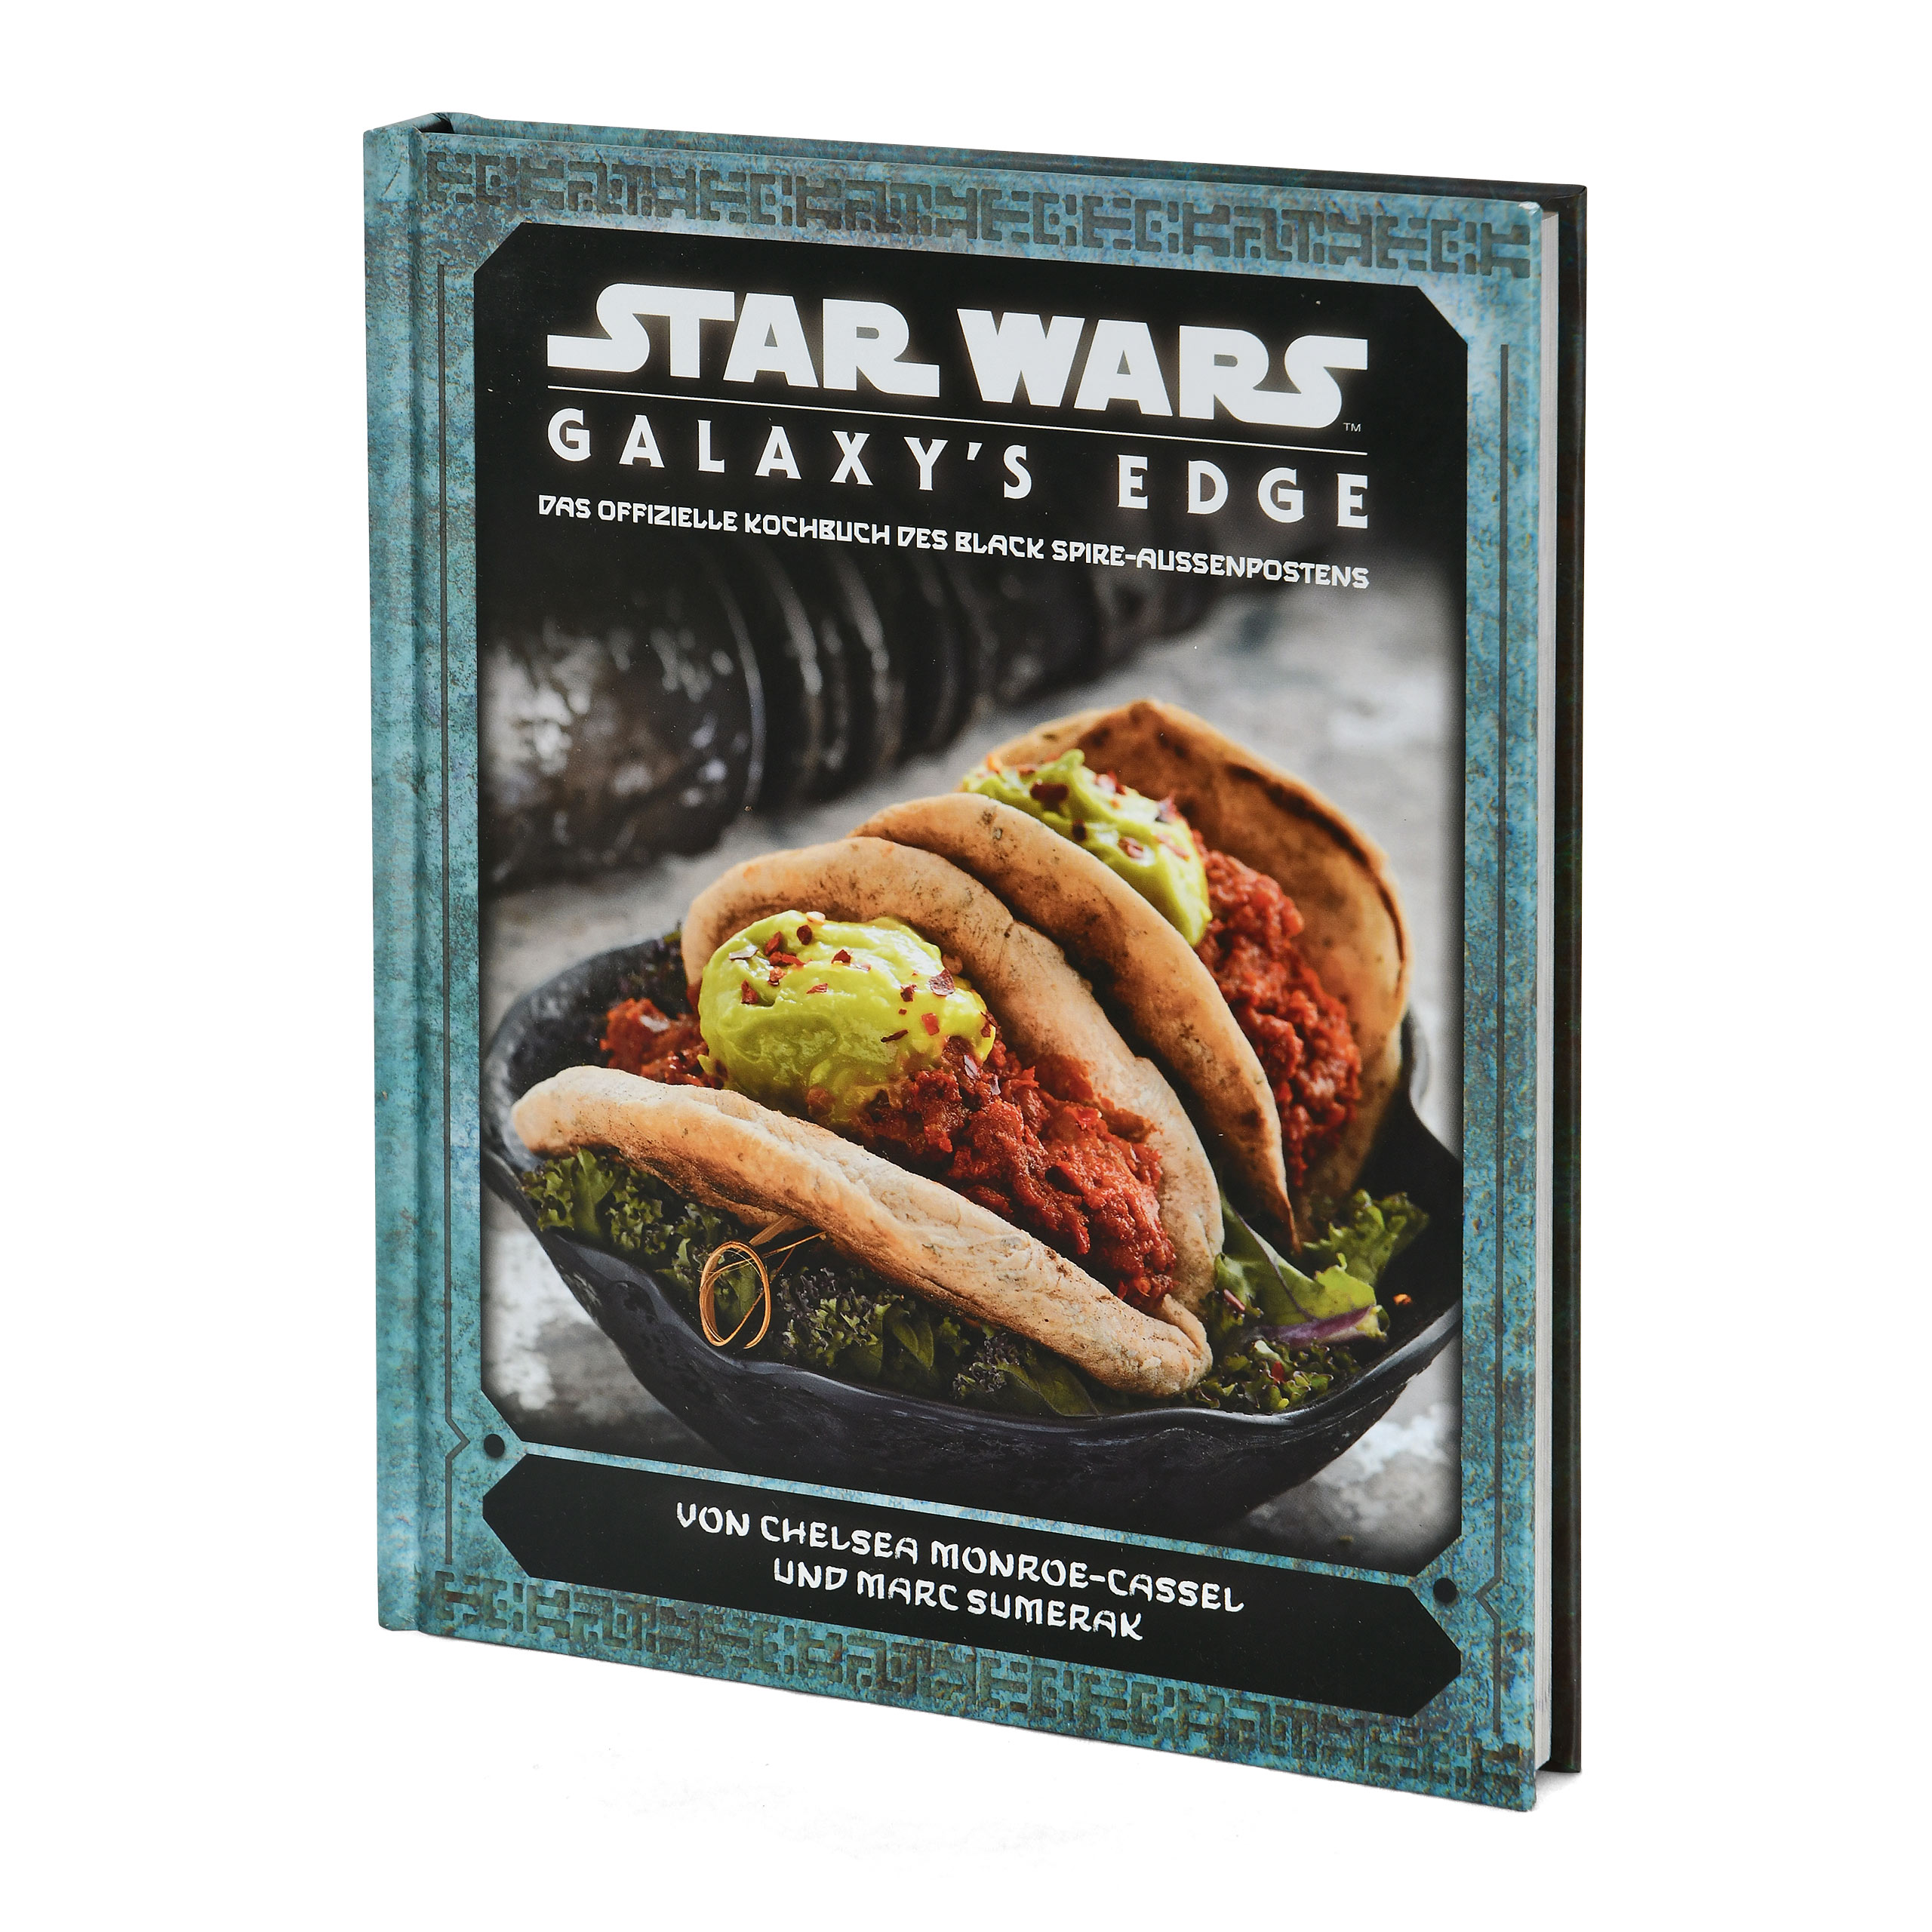 Star Wars - Galaxy's Edge The official cookbook of the Black Spire Outpost